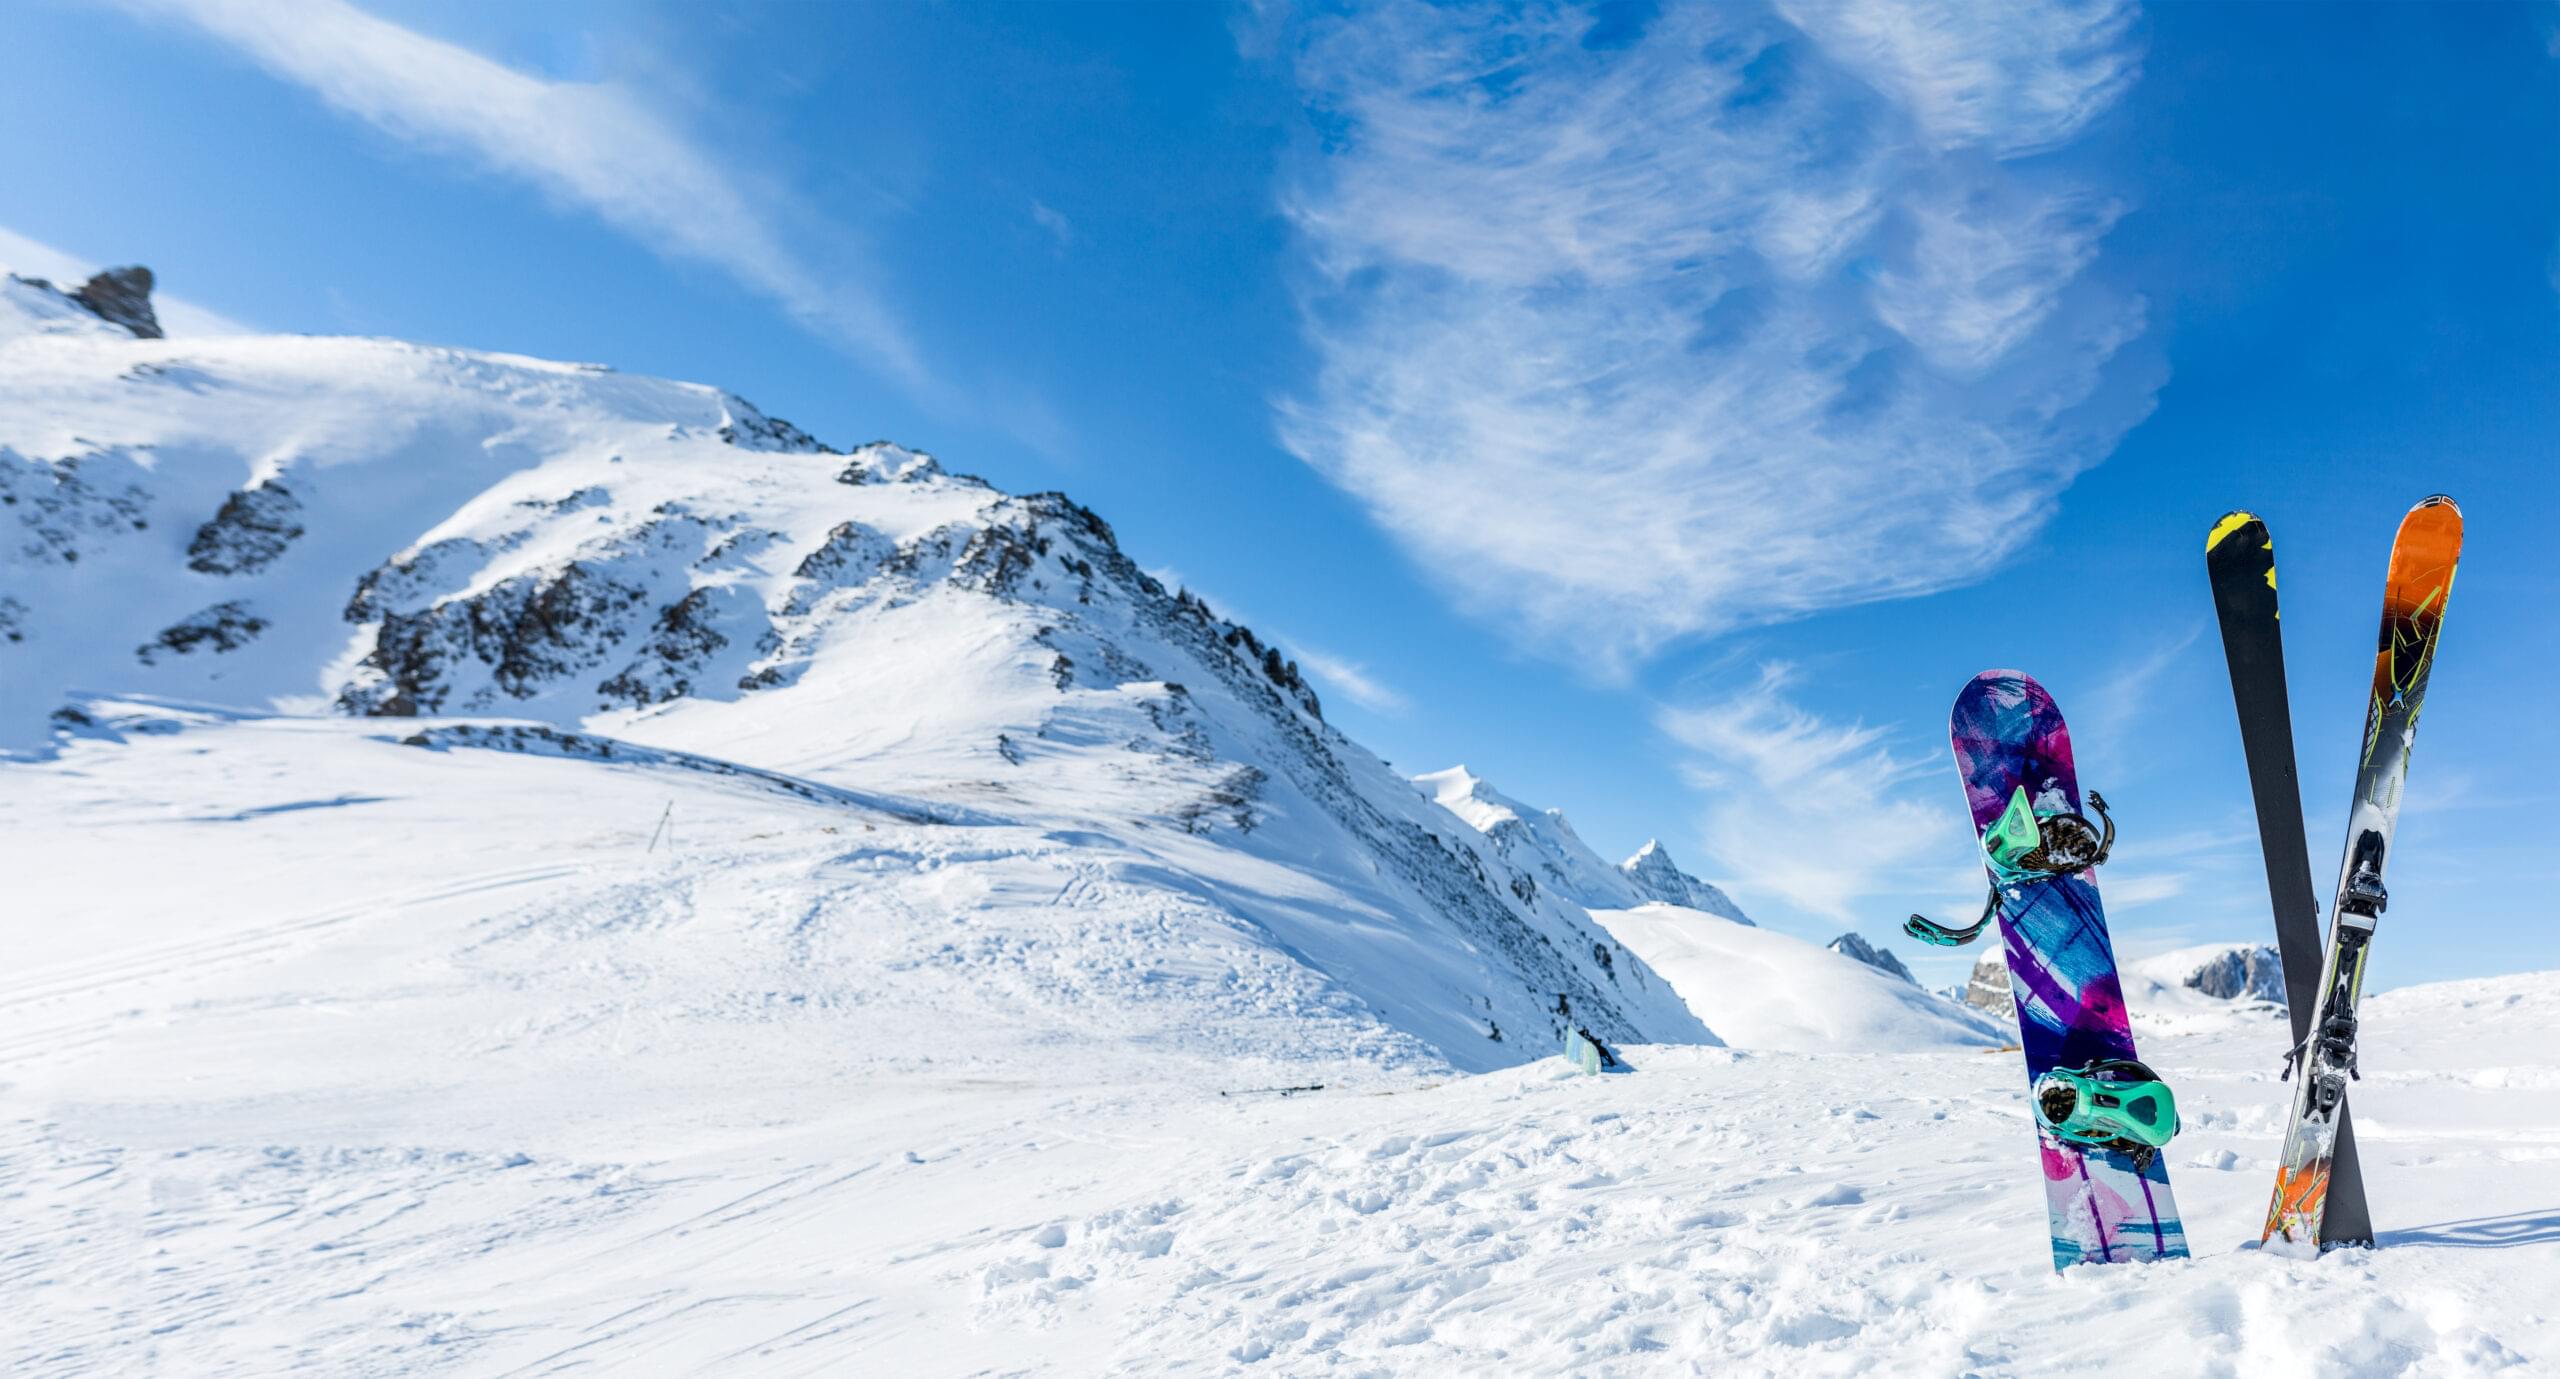 Sun protection while skiing - What helps against sunburn?